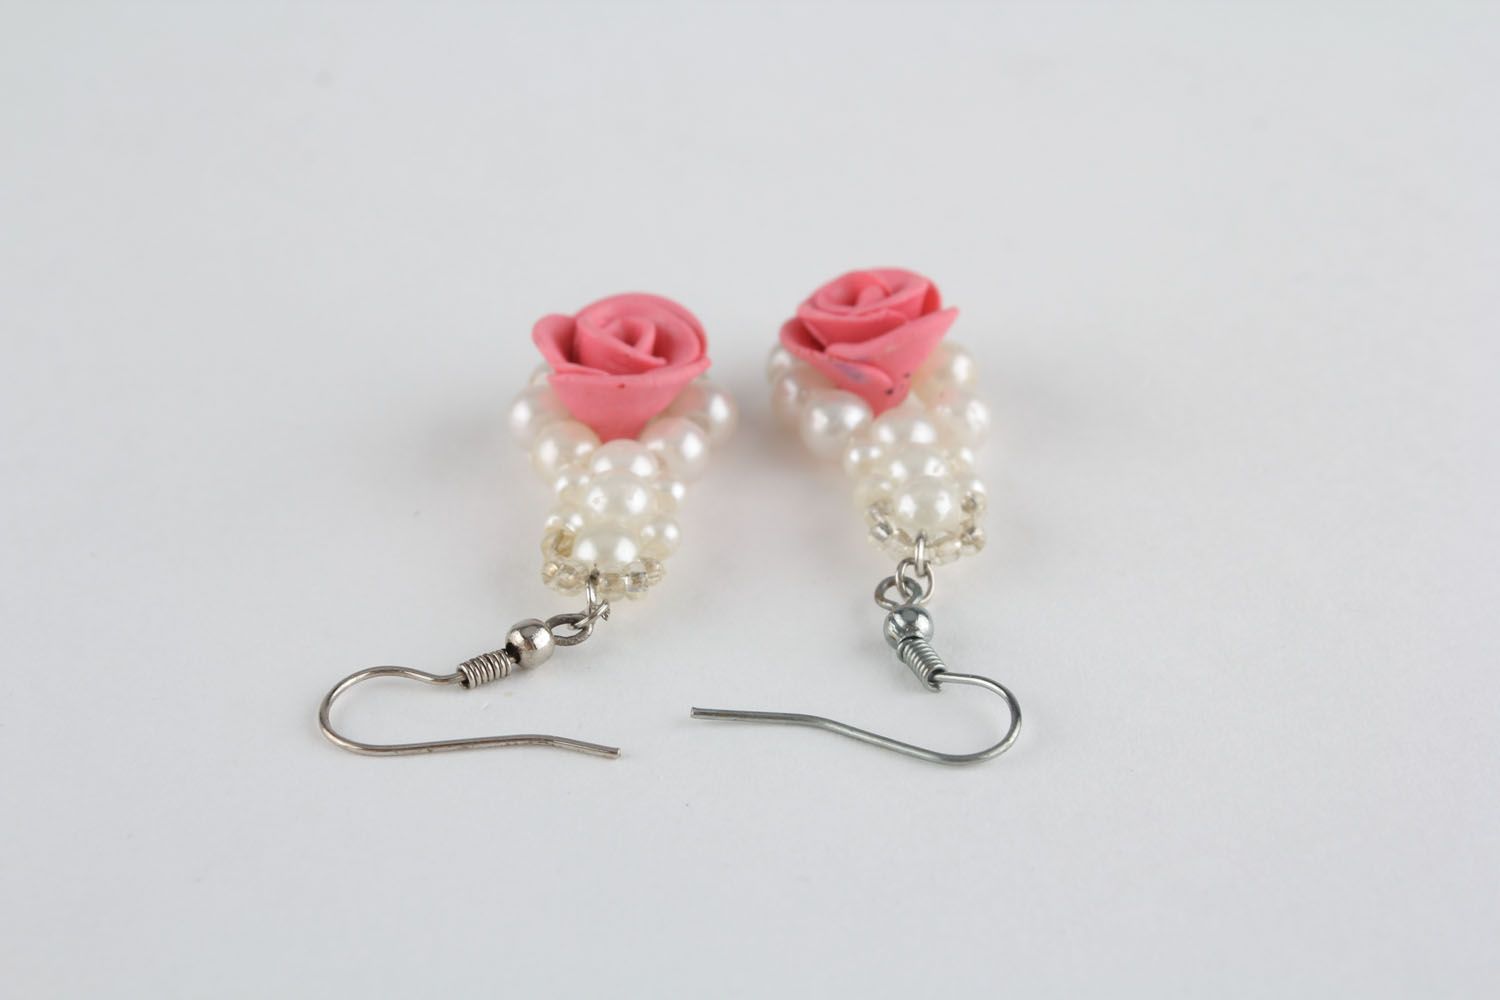 Earrings made of beads and polymer clay photo 1